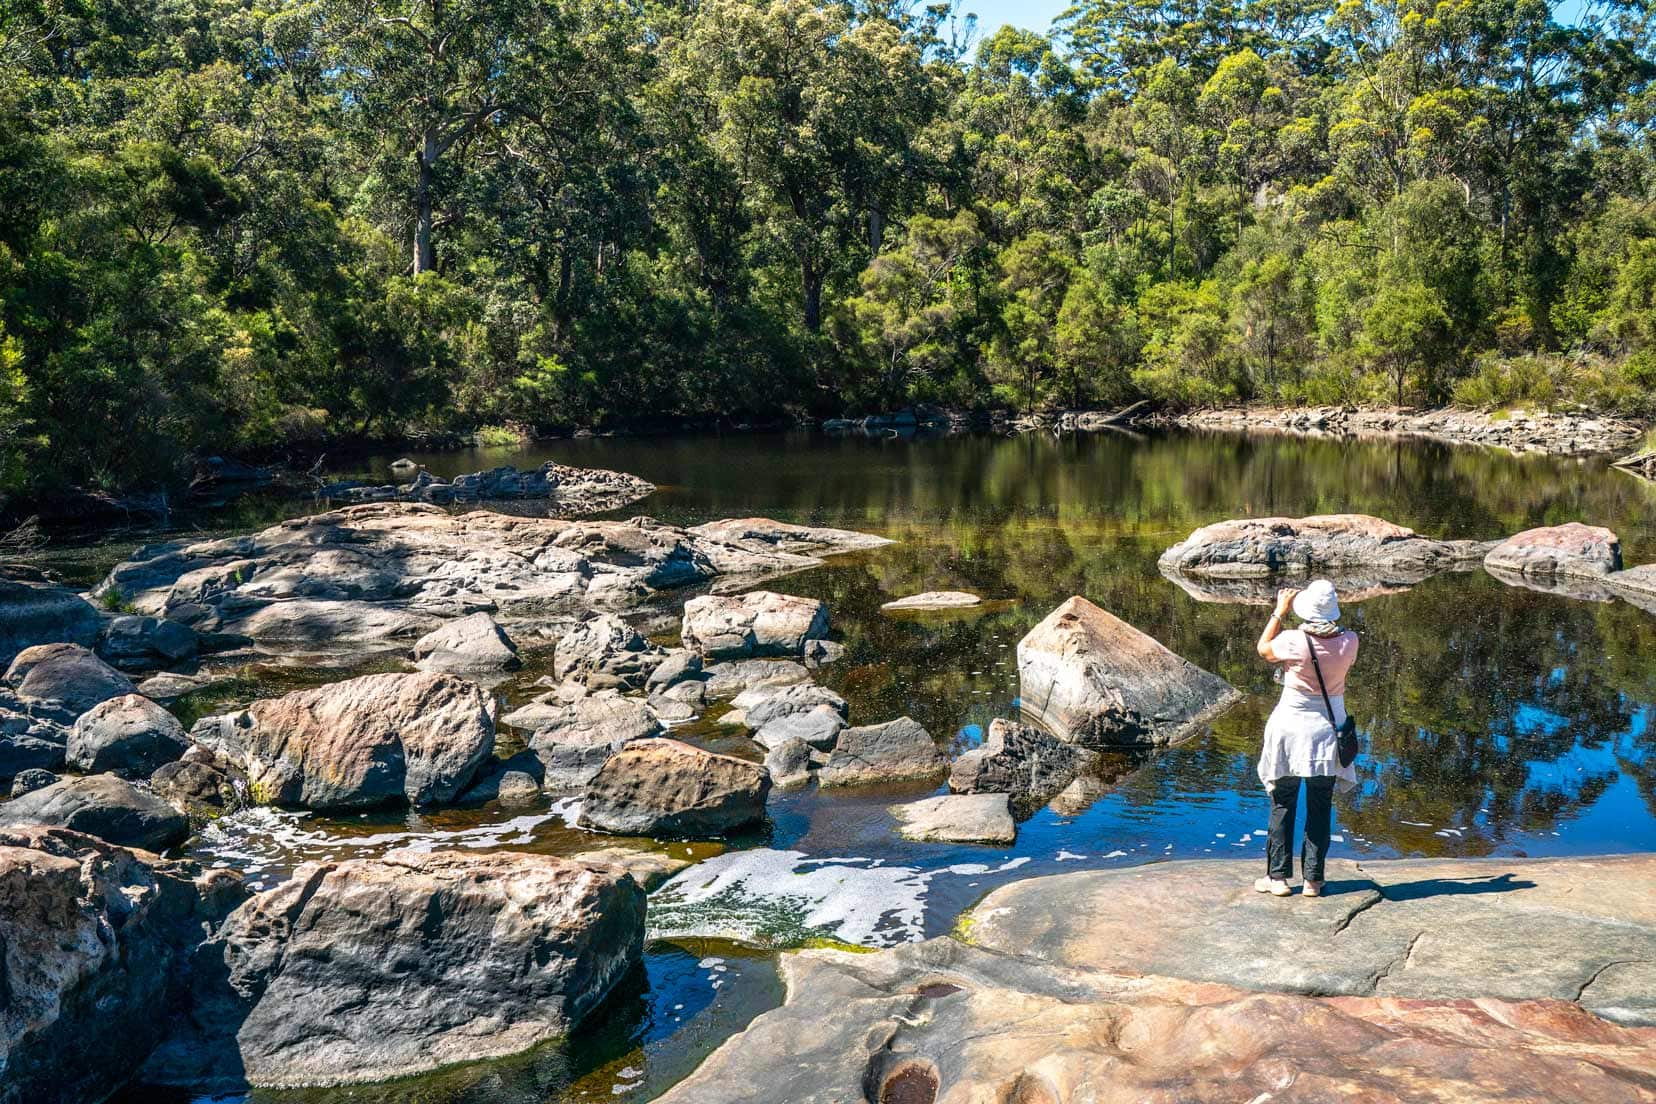 Shelley taking photos at Circular Pool - a serene pool with granite rocks scattered inside it and a backdrop of trees